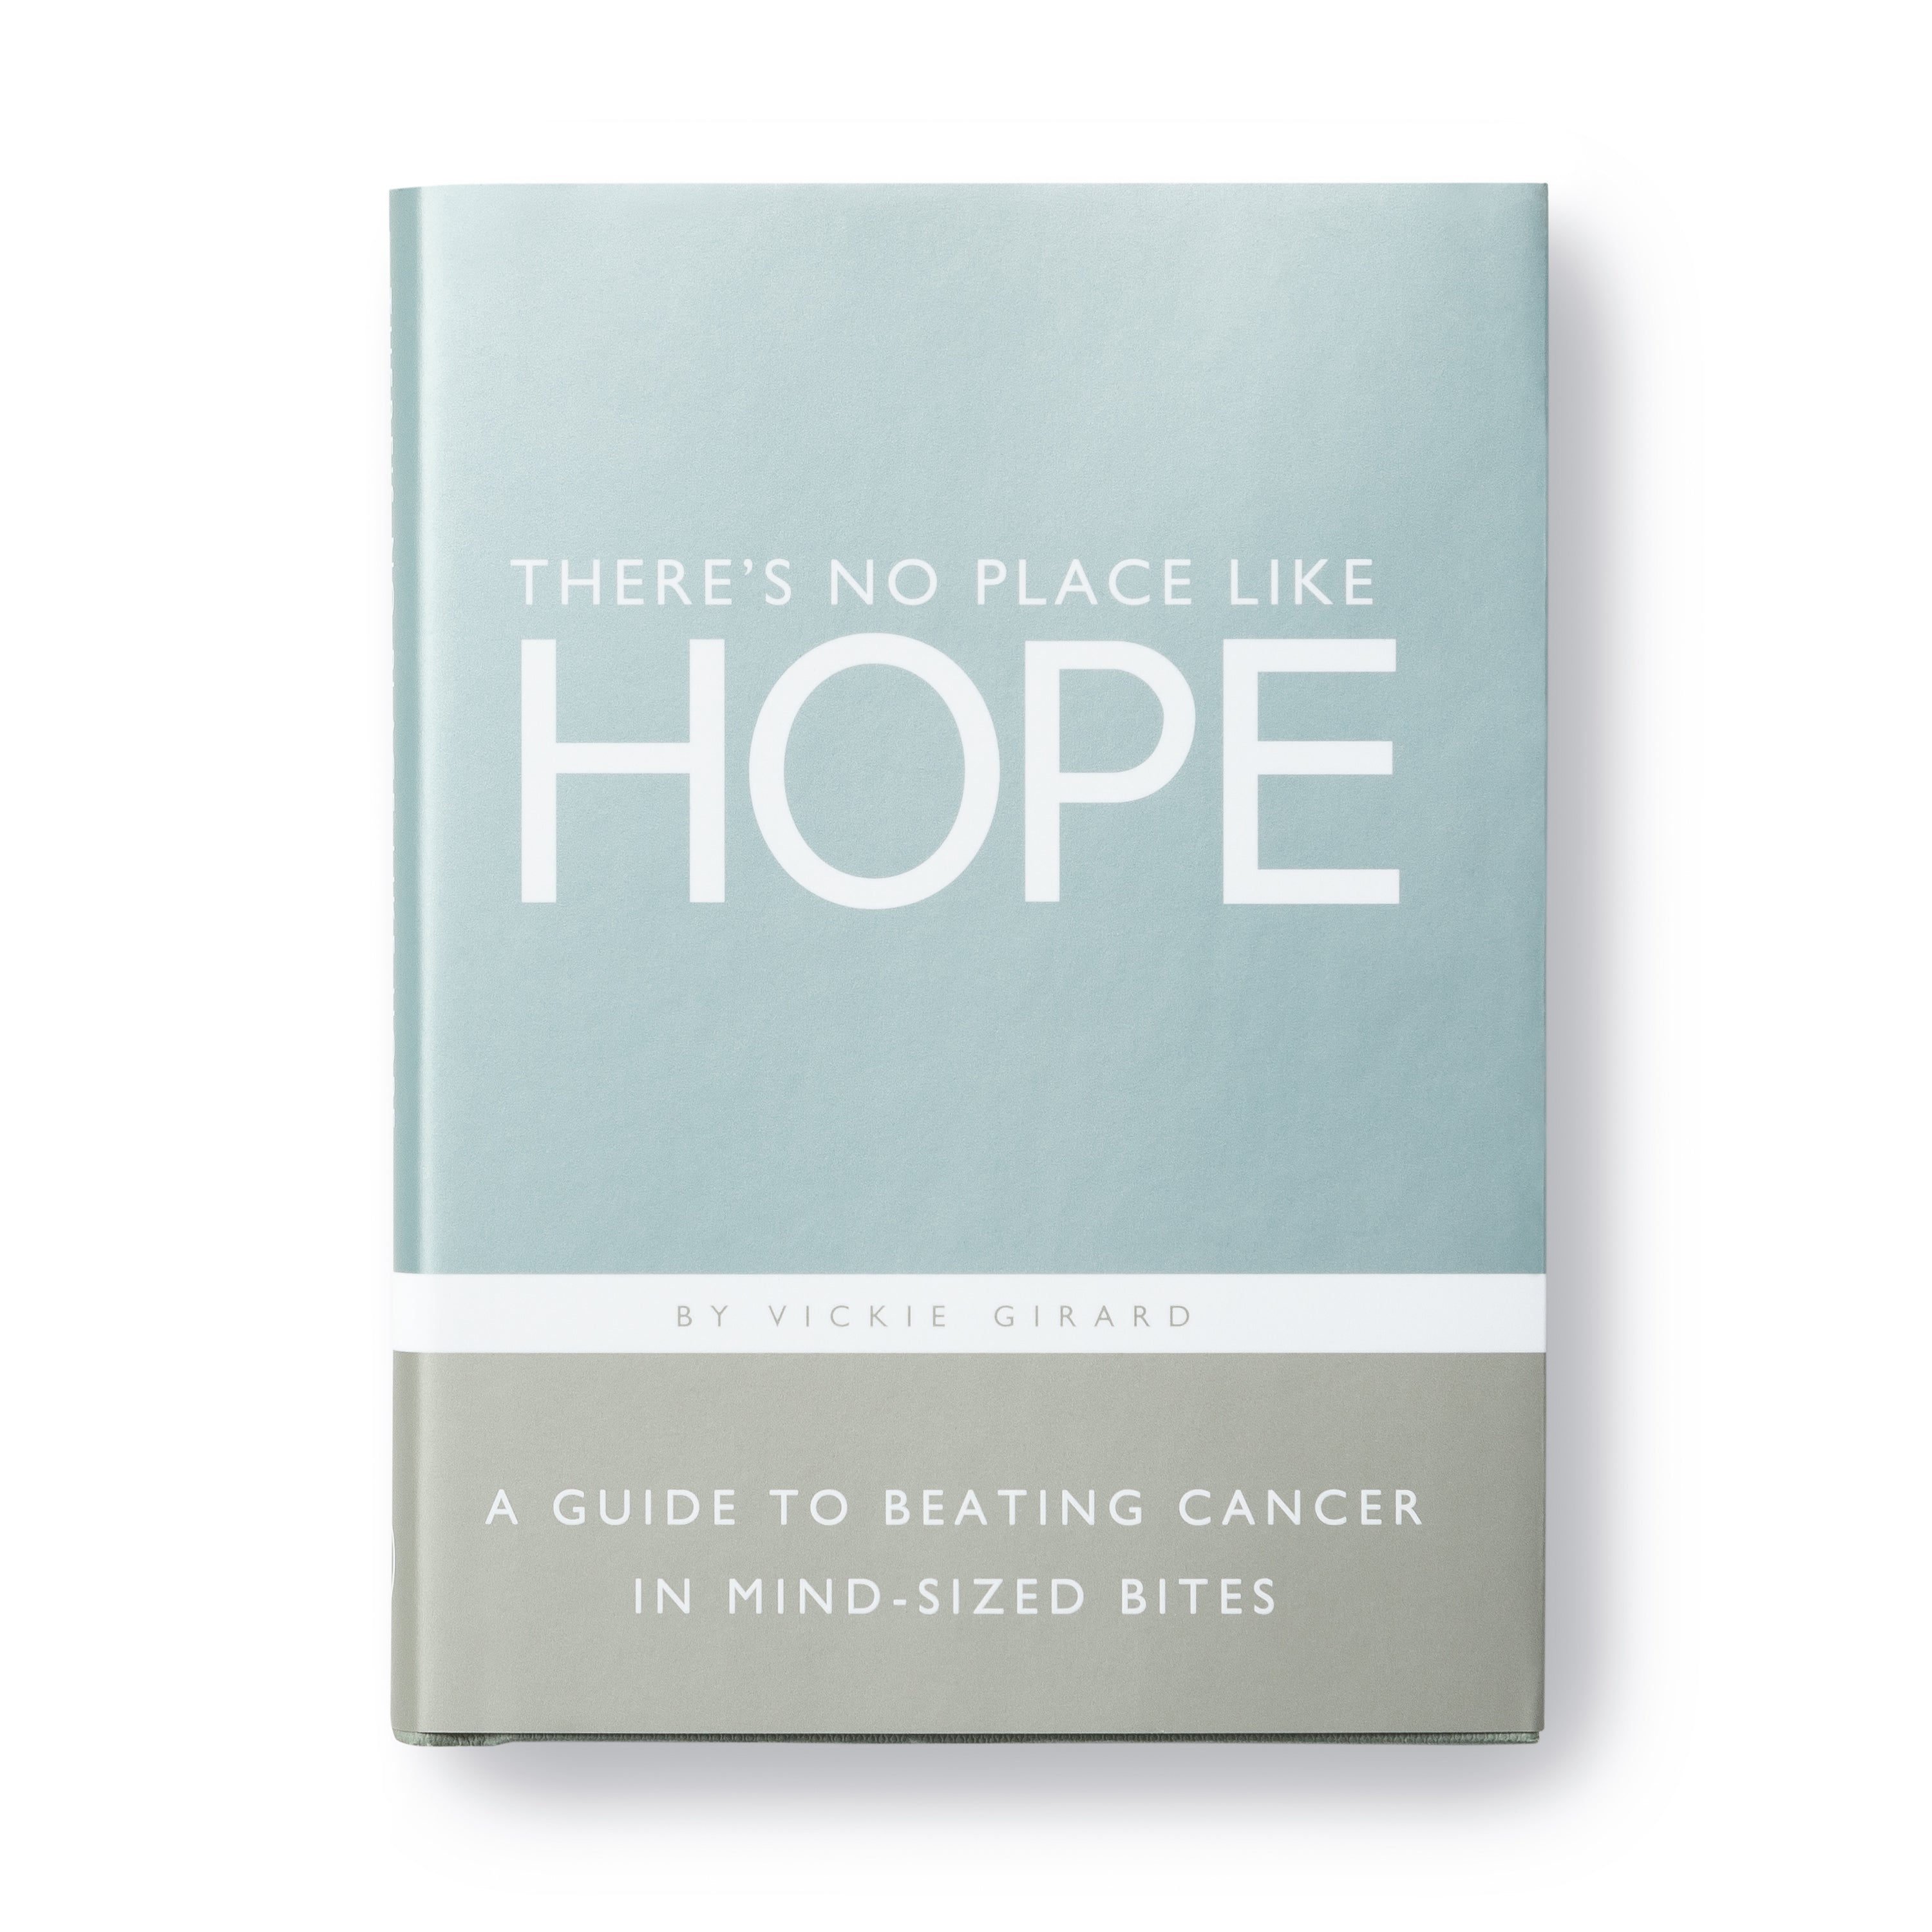 Hope in the Face of Cancer: A Survival Guide for the Journey You